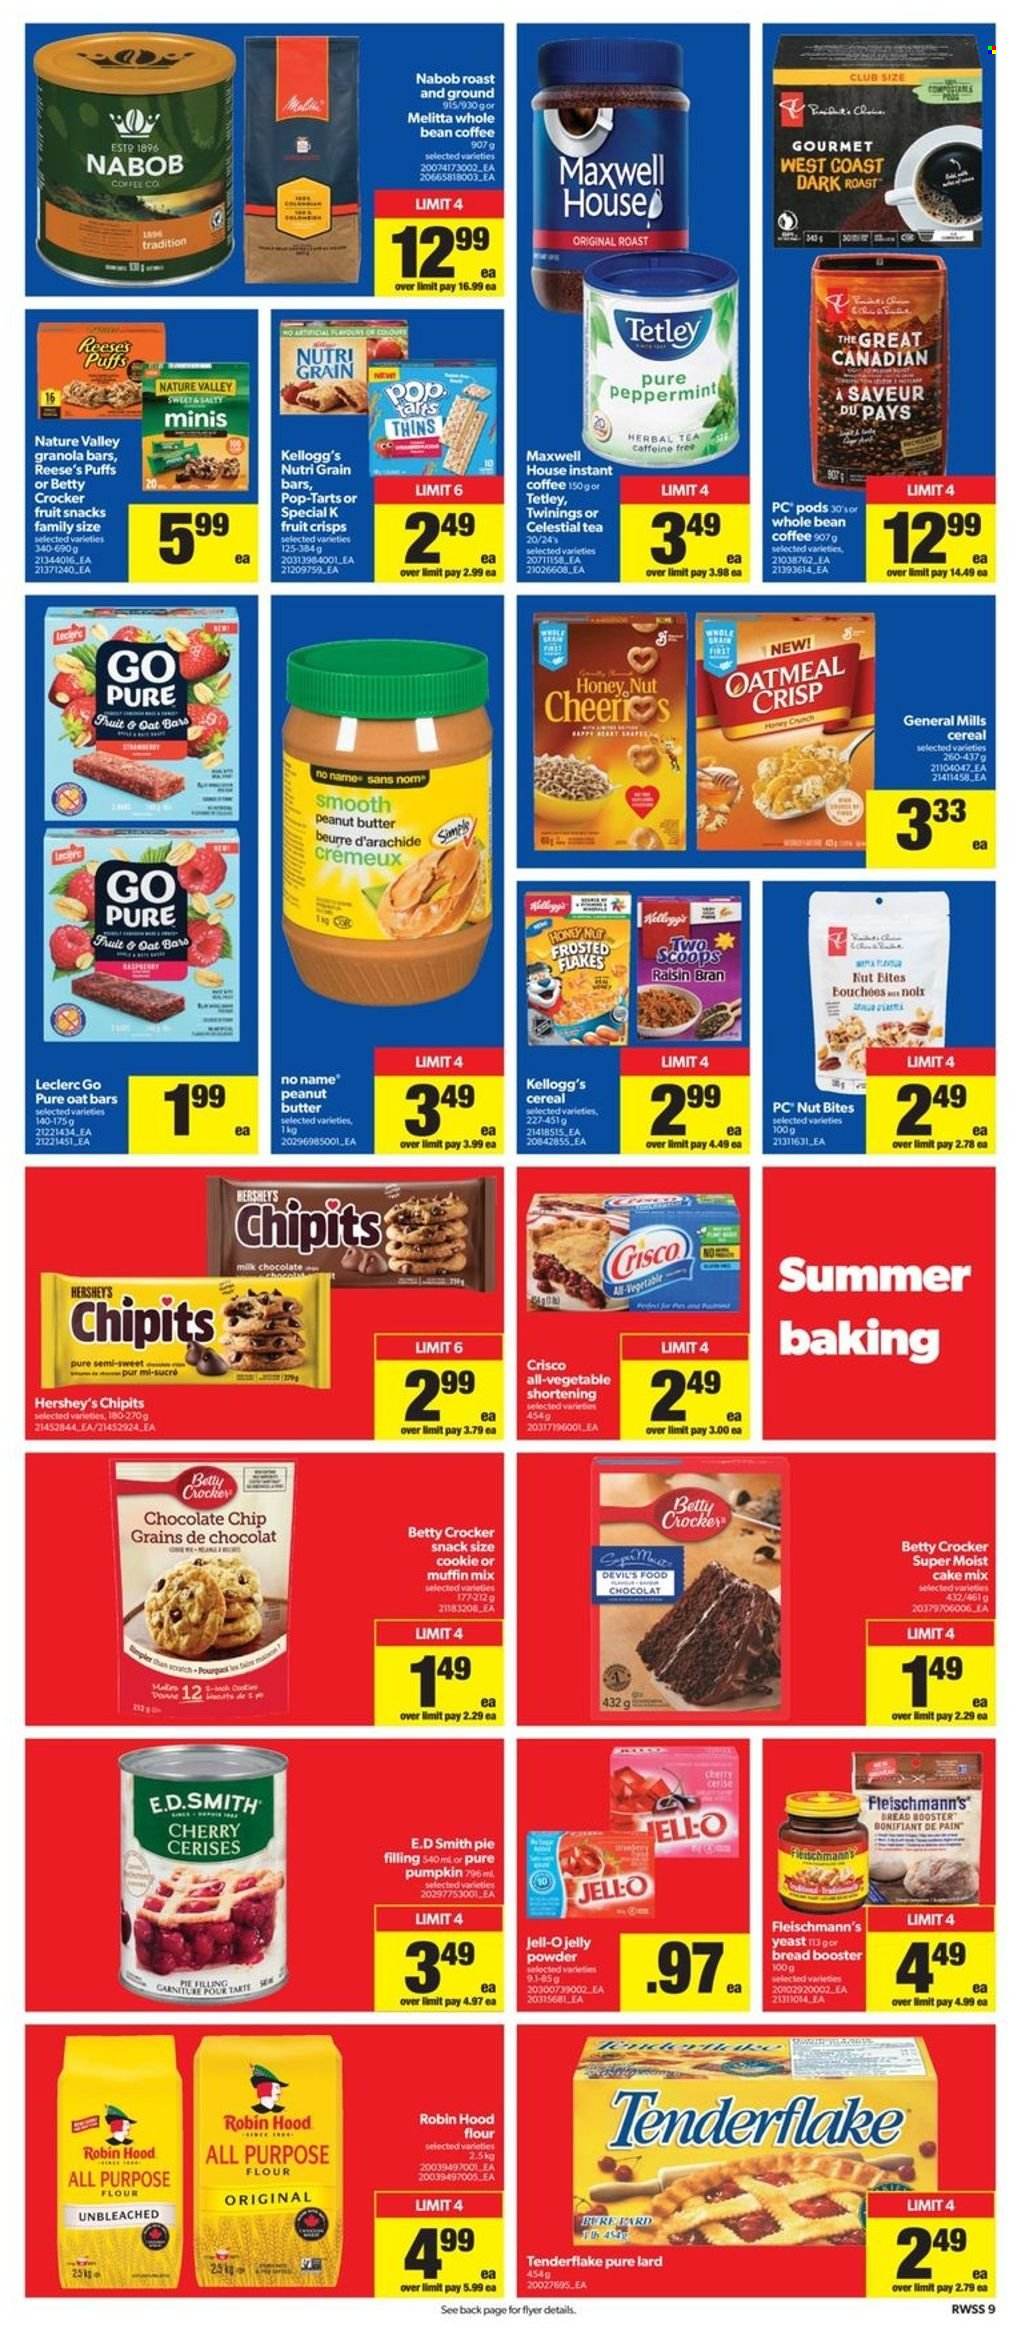 thumbnail - Real Canadian Superstore Flyer - June 30, 2022 - July 06, 2022 - Sales products - bread, puffs, cake mix, muffin mix, pumpkin, cherries, No Name, yeast, Reese's, Hershey's, cookies, milk chocolate, jelly, Kellogg's, Pop-Tarts, fruit snack, Nutri-Grain bars, Thins, all purpose flour, Crisco, flour, shortening, pie filling, oatmeal, Jell-O, cereals, granola bar, Raisin Bran, Nature Valley, Nutri-Grain, Maxwell House, tea, herbal tea, Twinings, instant coffee, Iams, lard. Page 10.